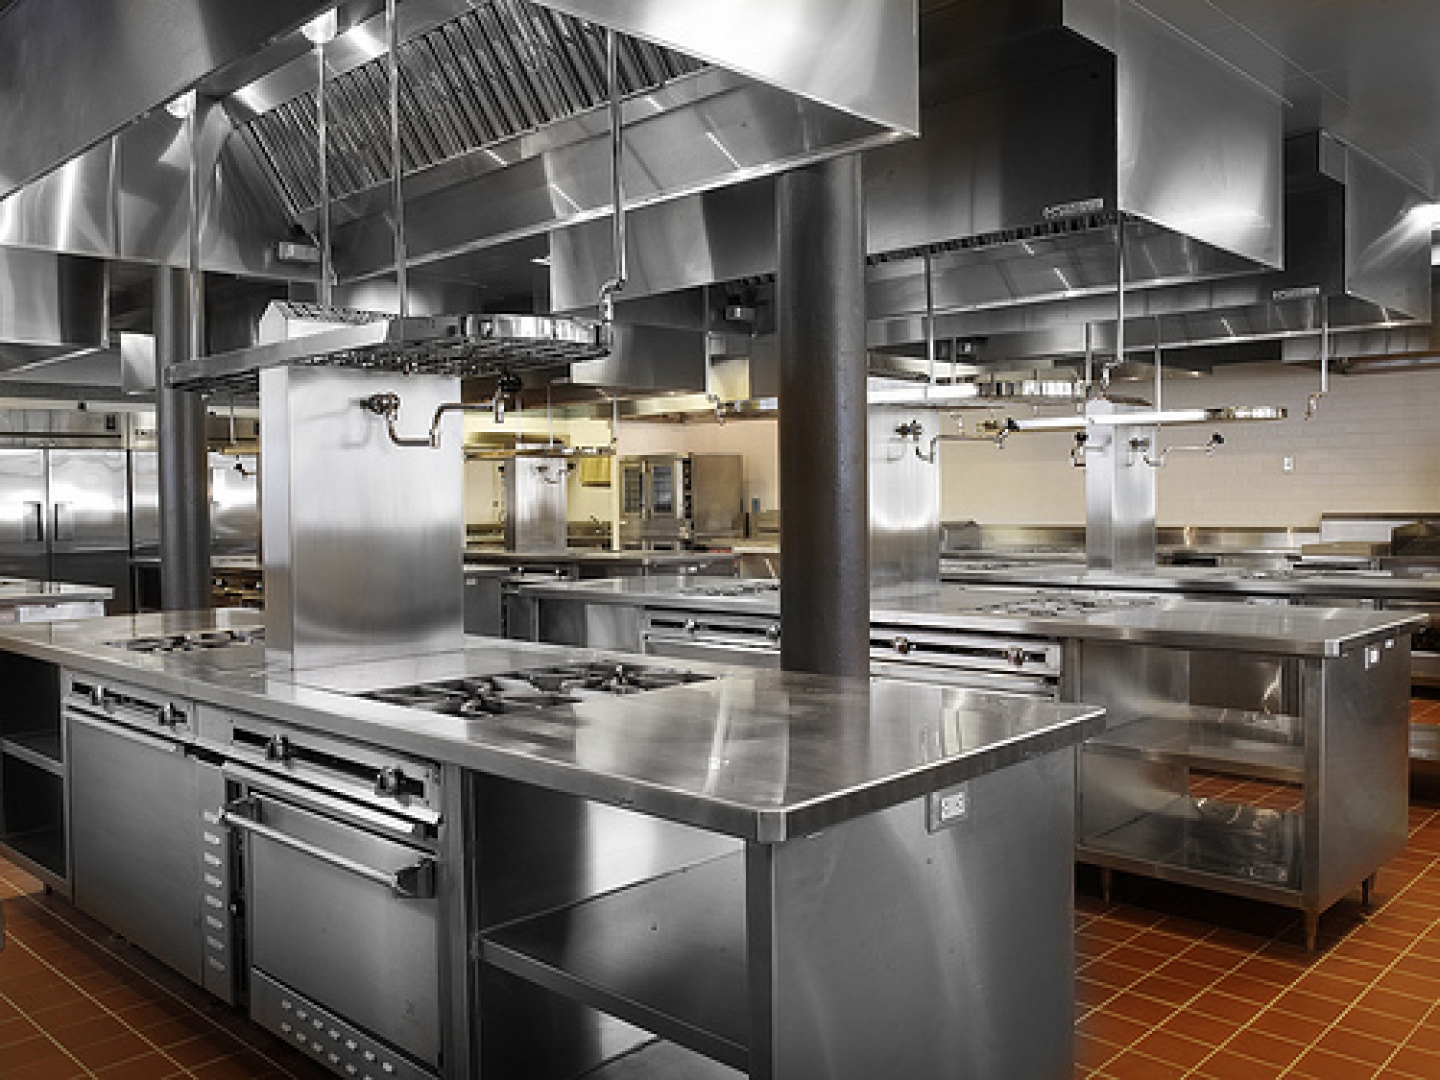 Buy Used Equipments For A Budget Commercial Kitchen